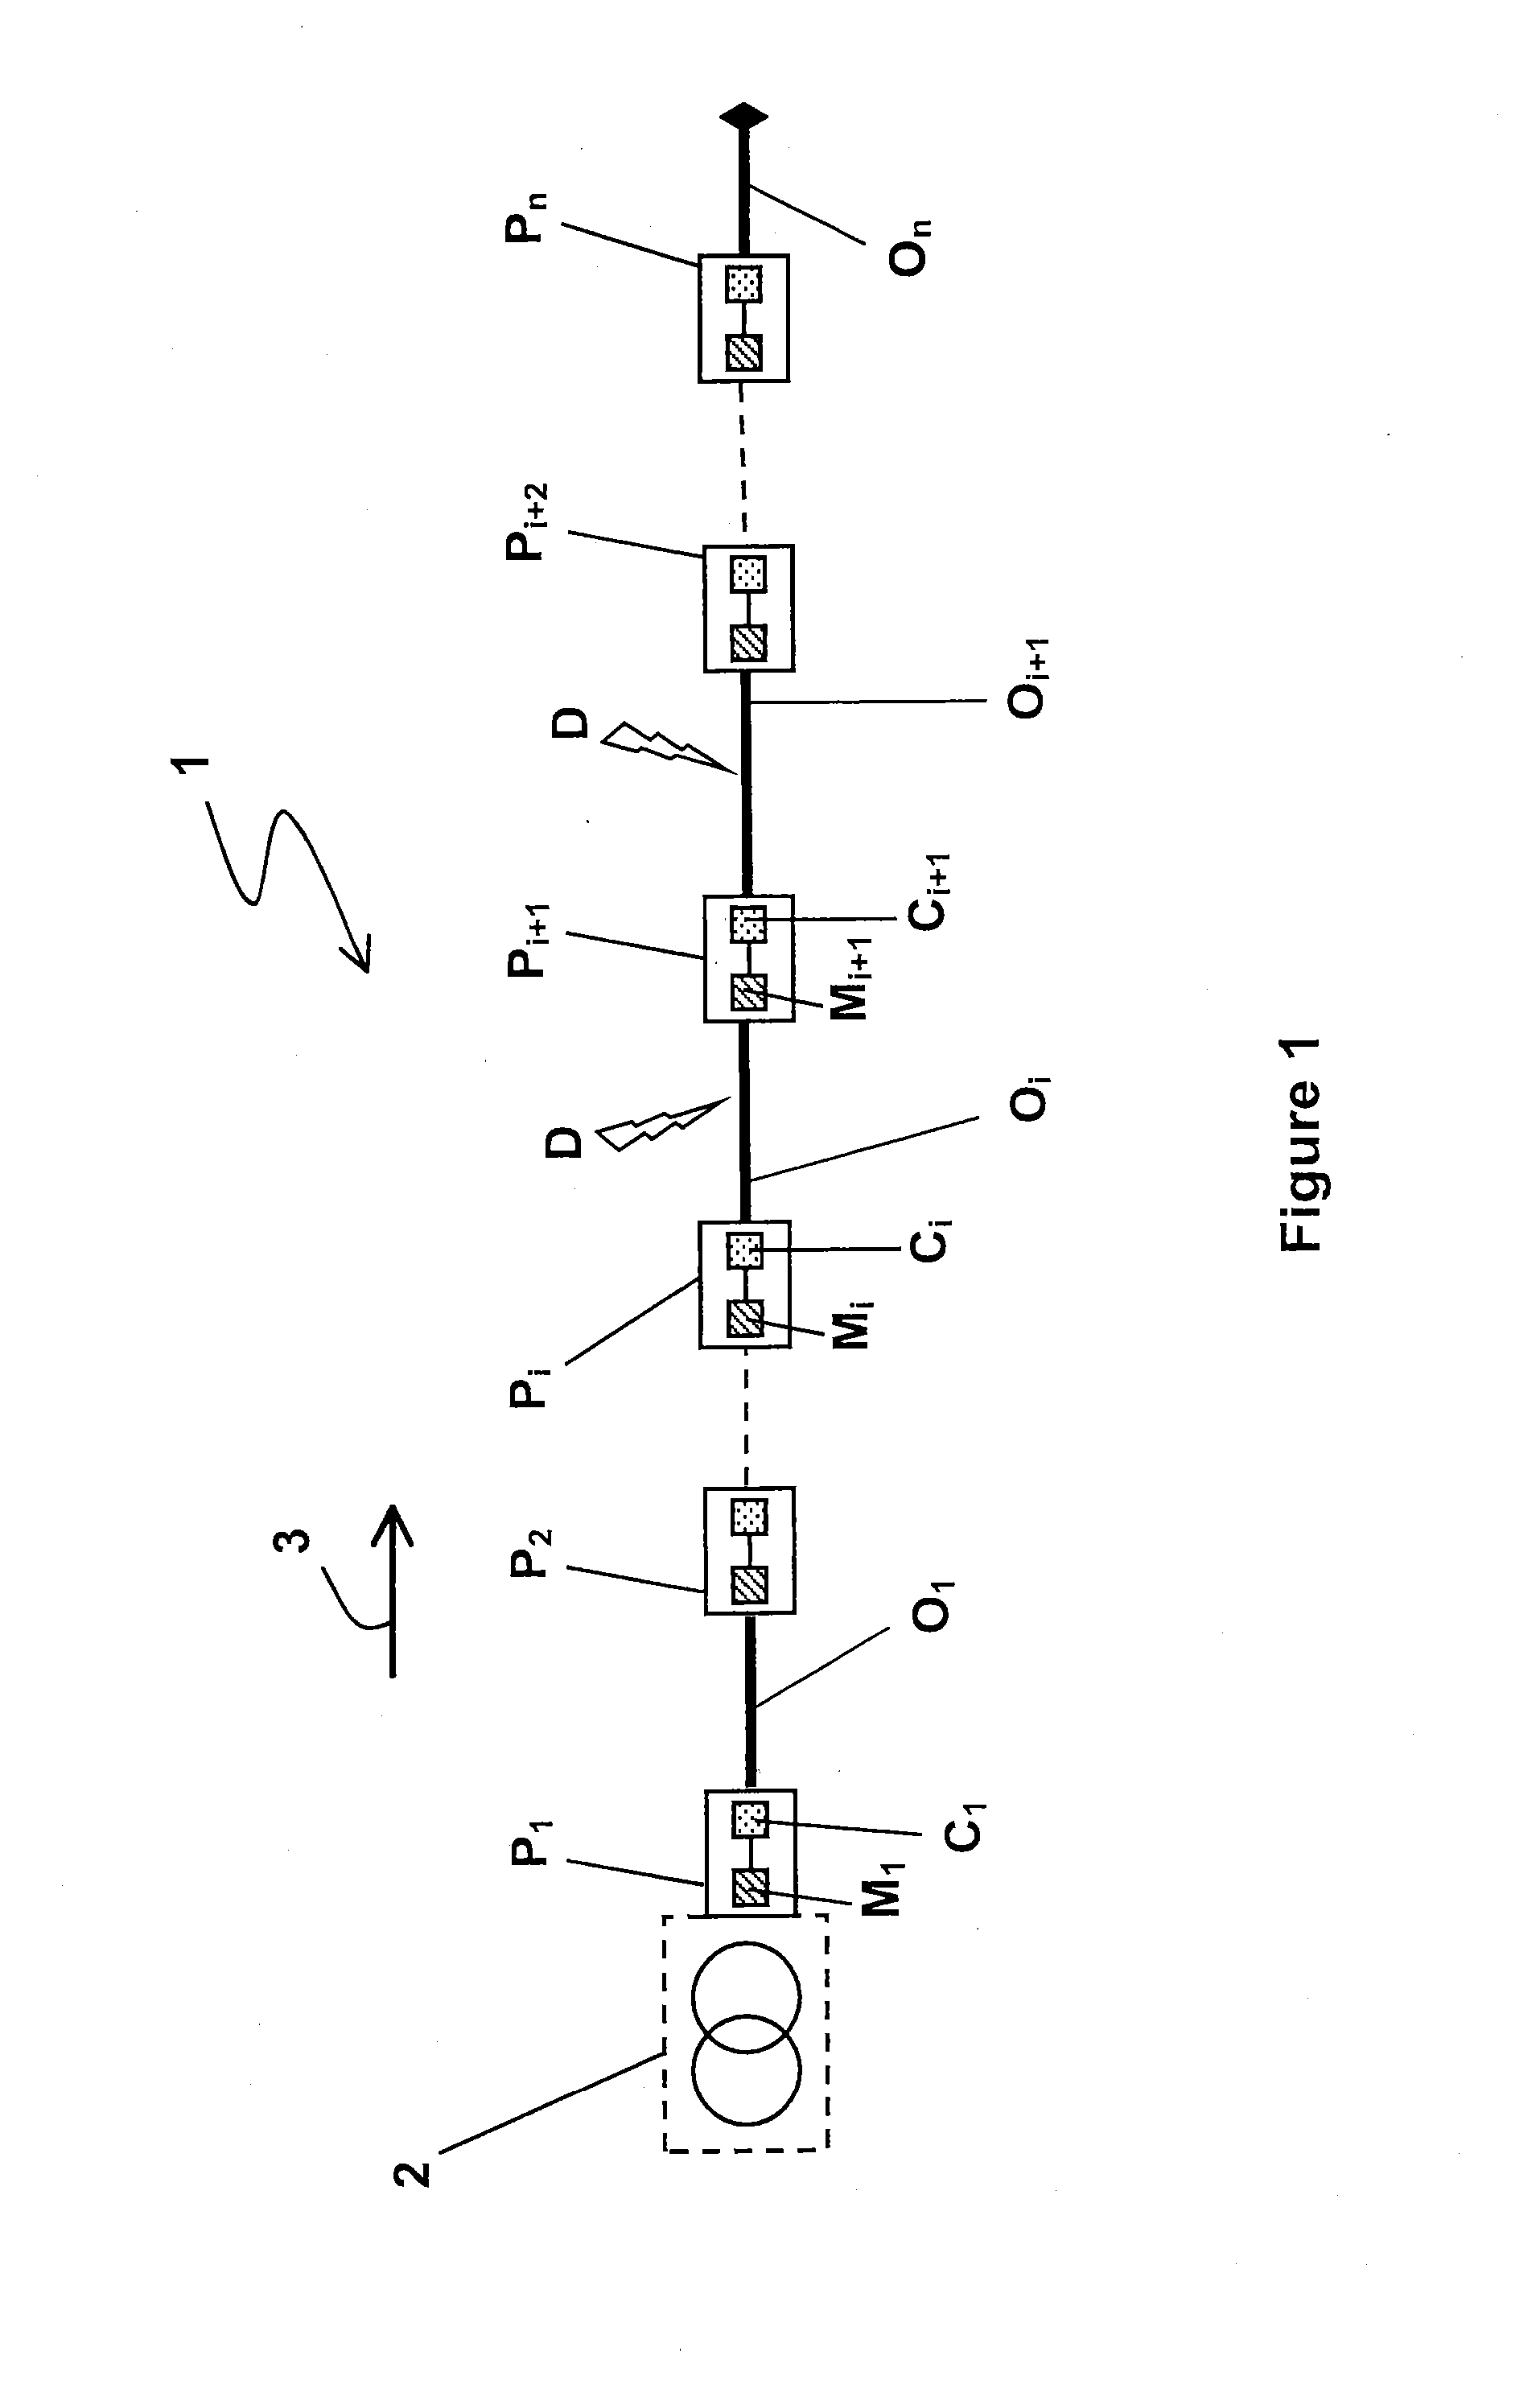 Protection relay system against single-phase faults for medium-voltage distribution networks